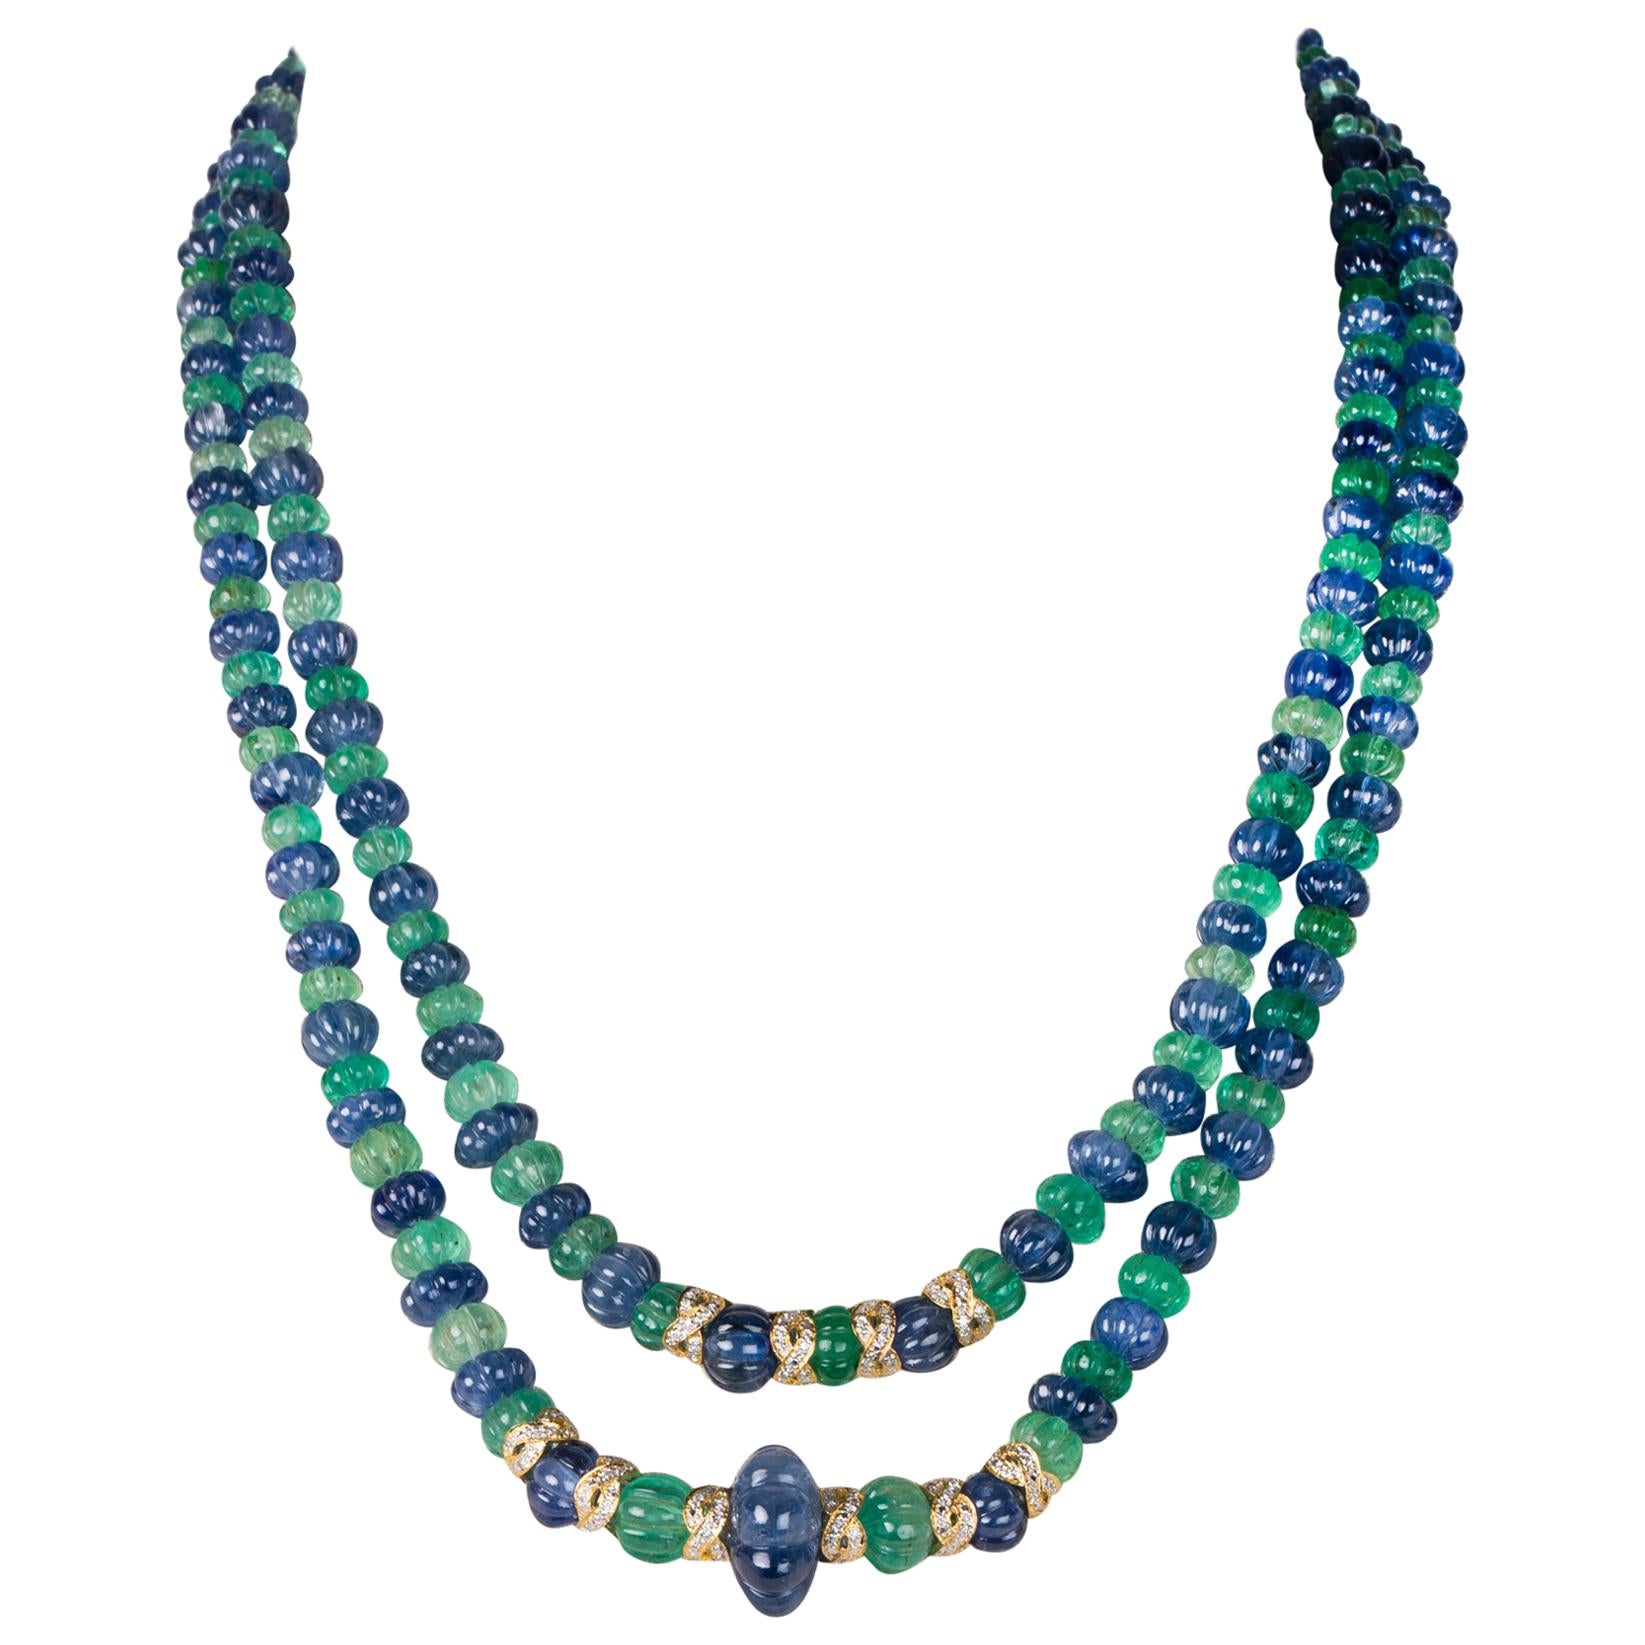 Emerald and Sapphire Carved Bead Necklace